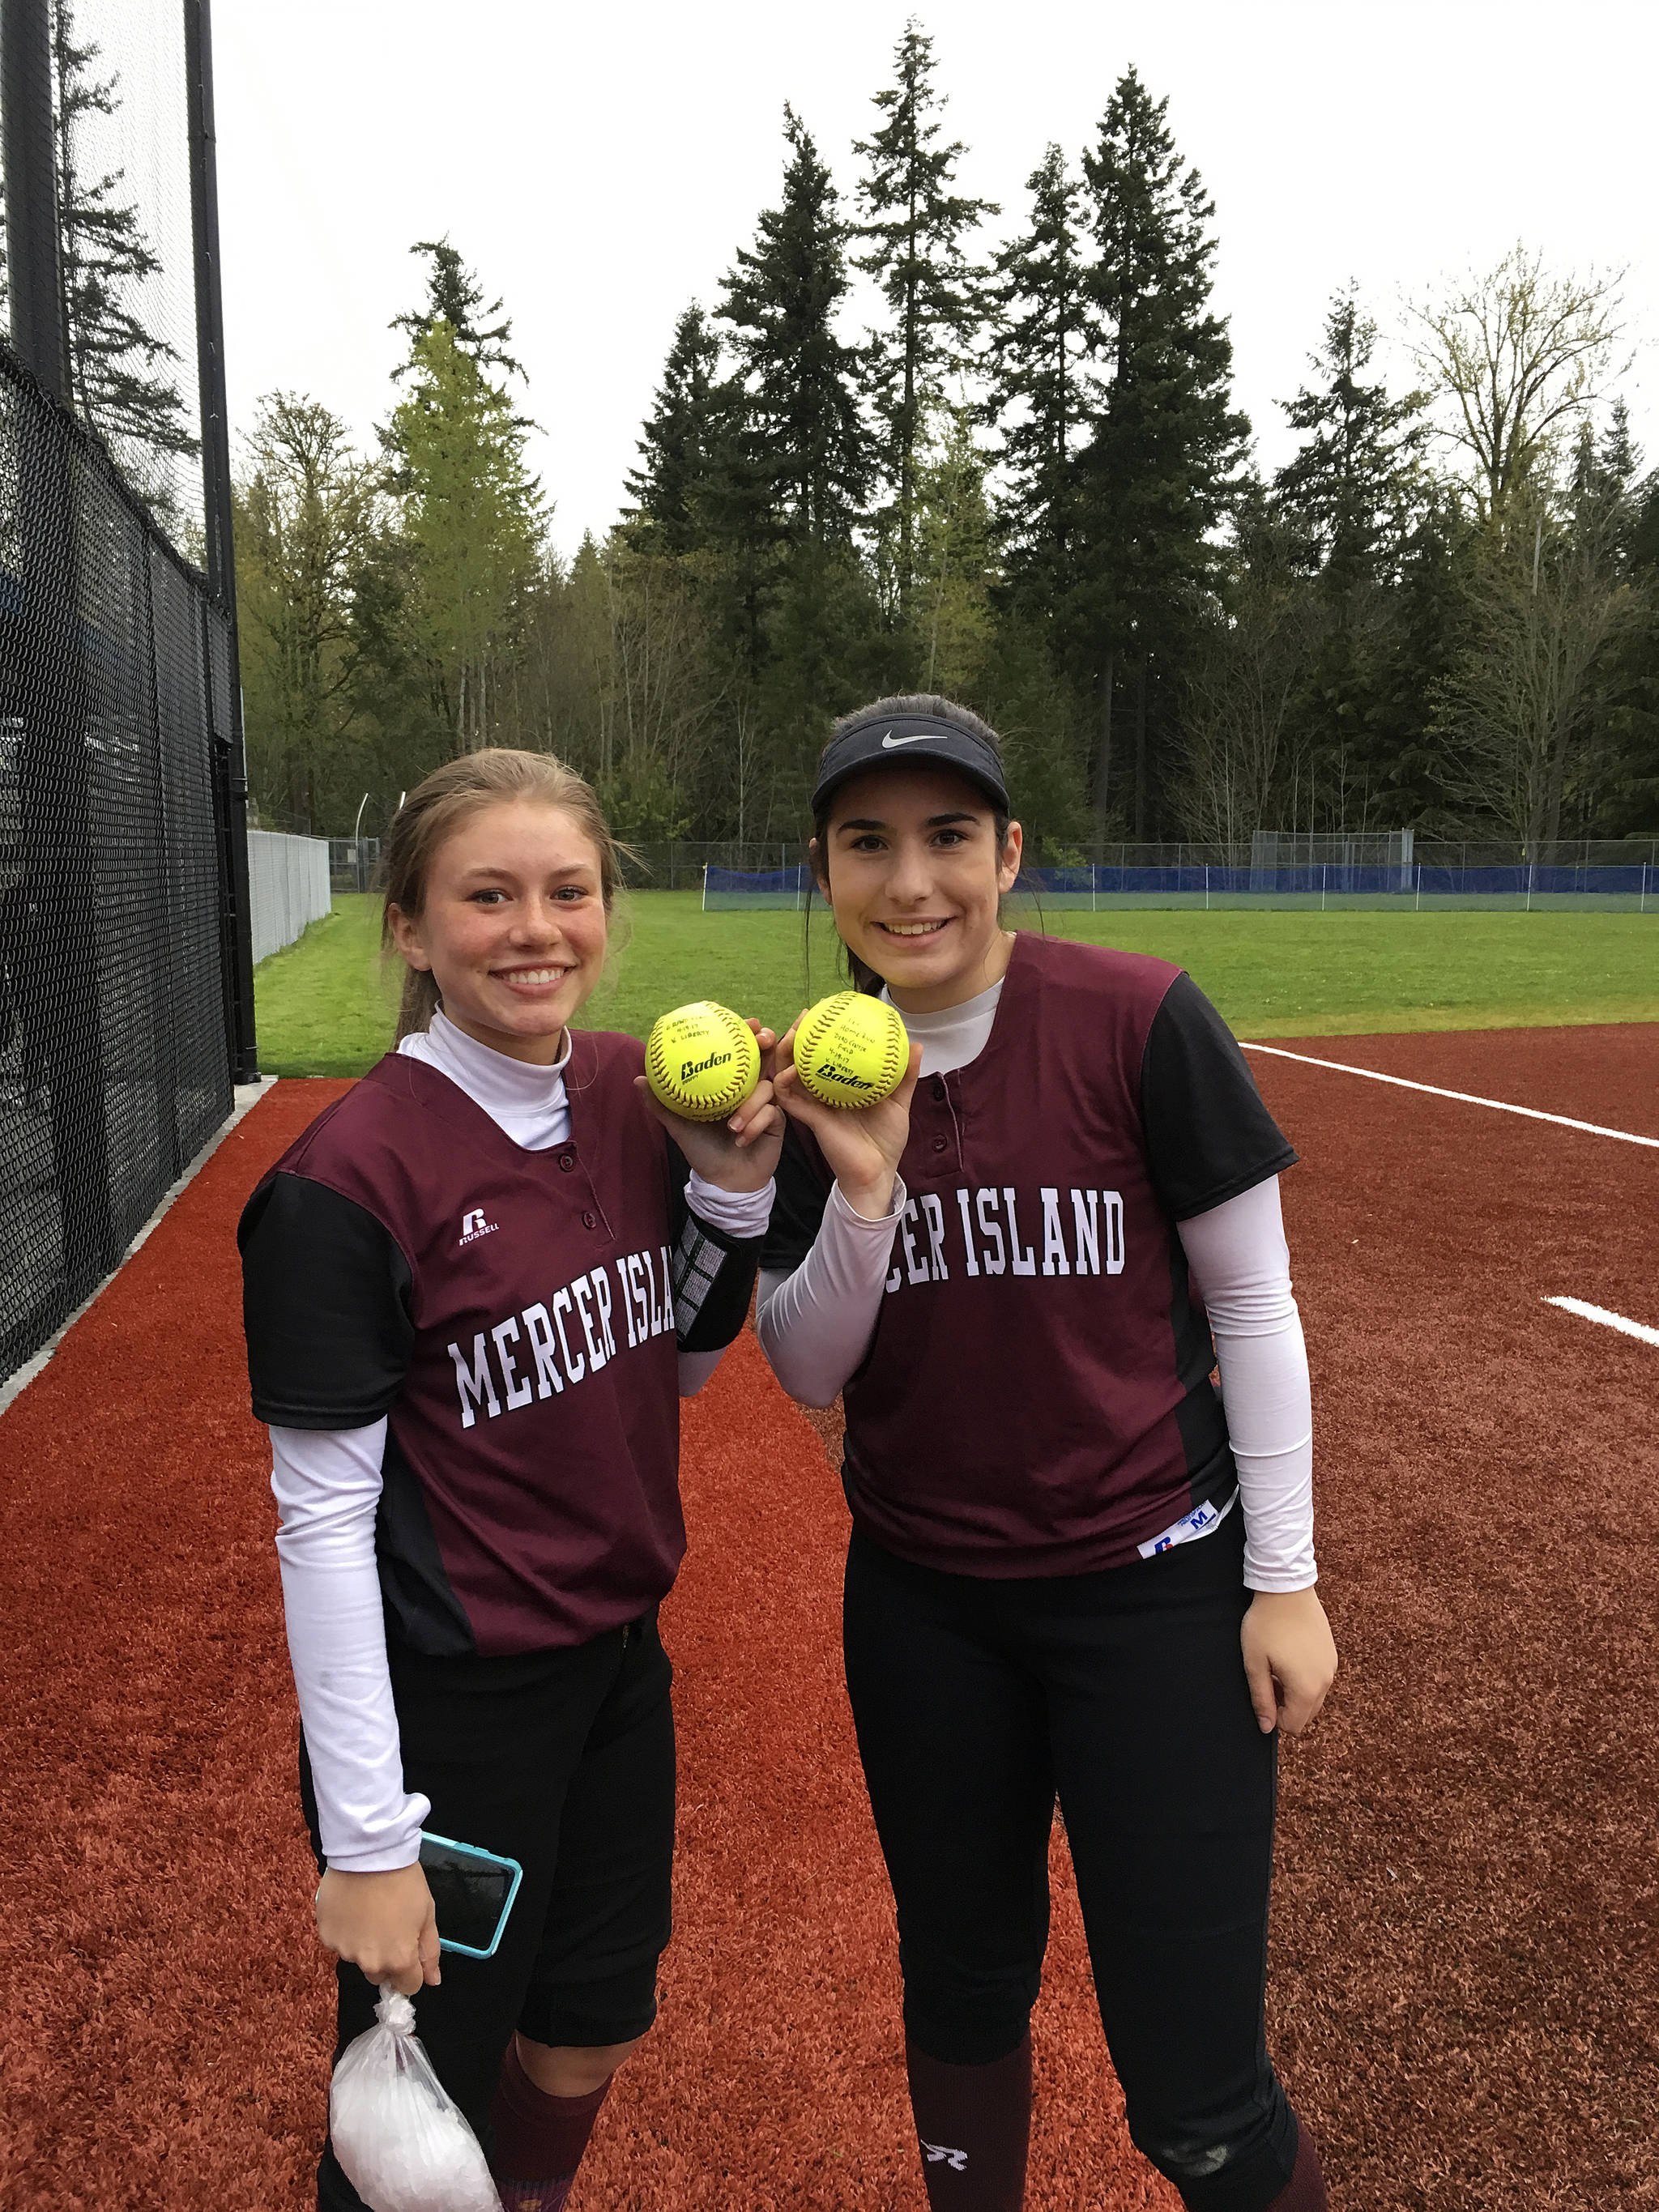 Photo courtesy of Carla Barokas                                Mercer Island softball players Olivia Kane, left, and Angelina Barokas, right, pose for a quick picture following Mercer Island’s 18-15 win against the Liberty Patriots on April 19. Kane connected on a grand-slam in the top of the fifth inning and Barokas had a home-run in the top of the sixth inning.